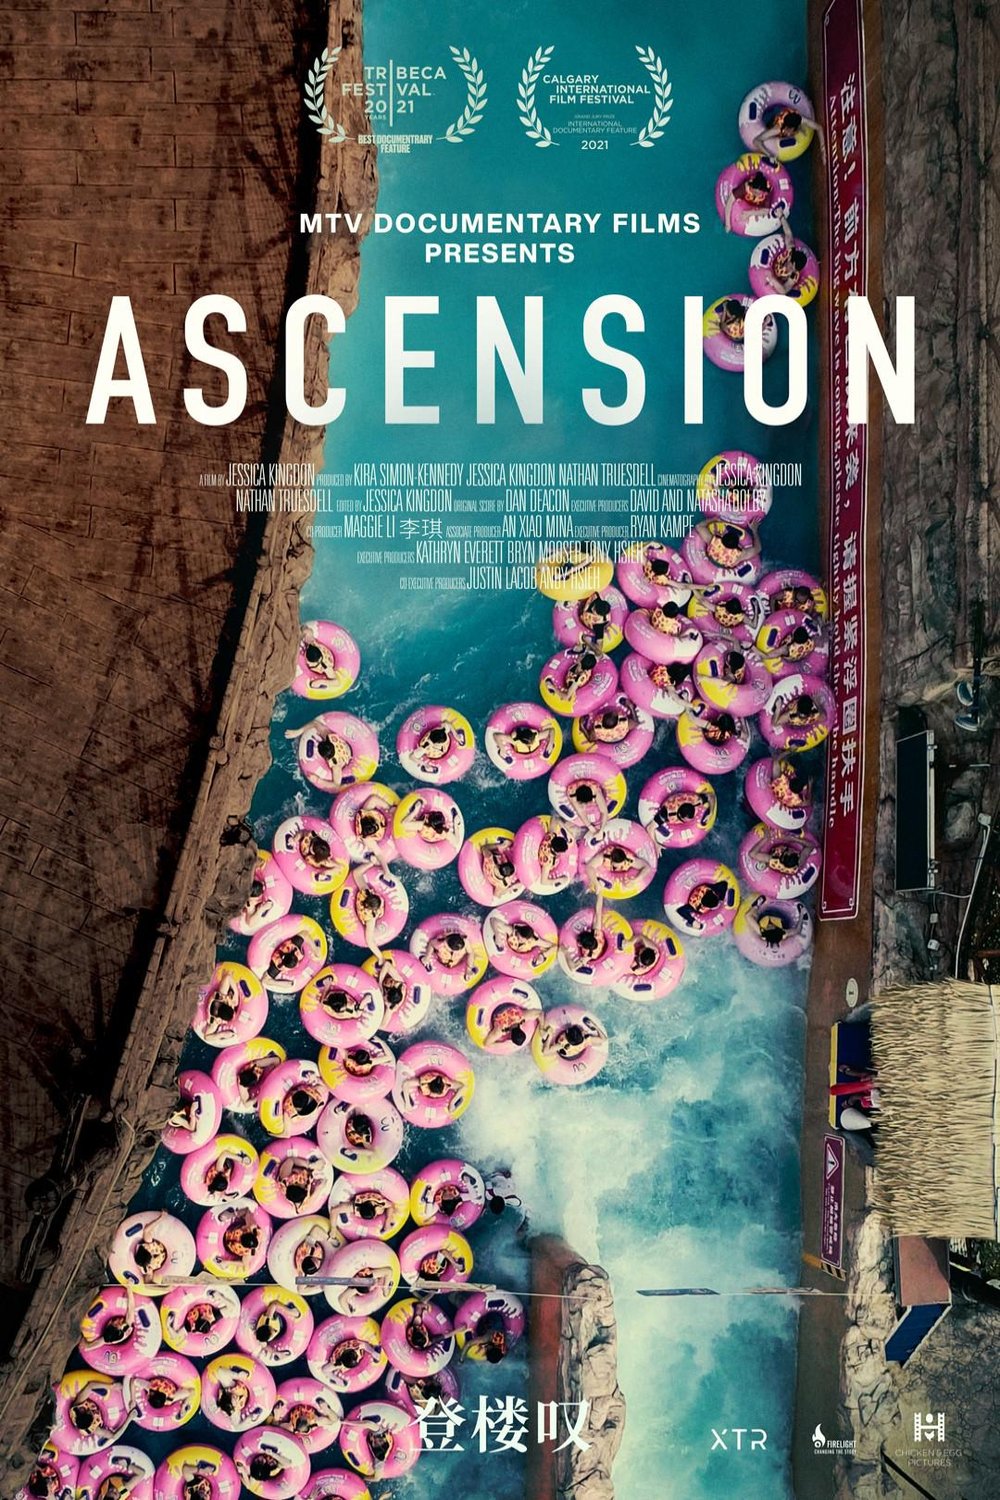 Mandarin poster of the movie Ascension